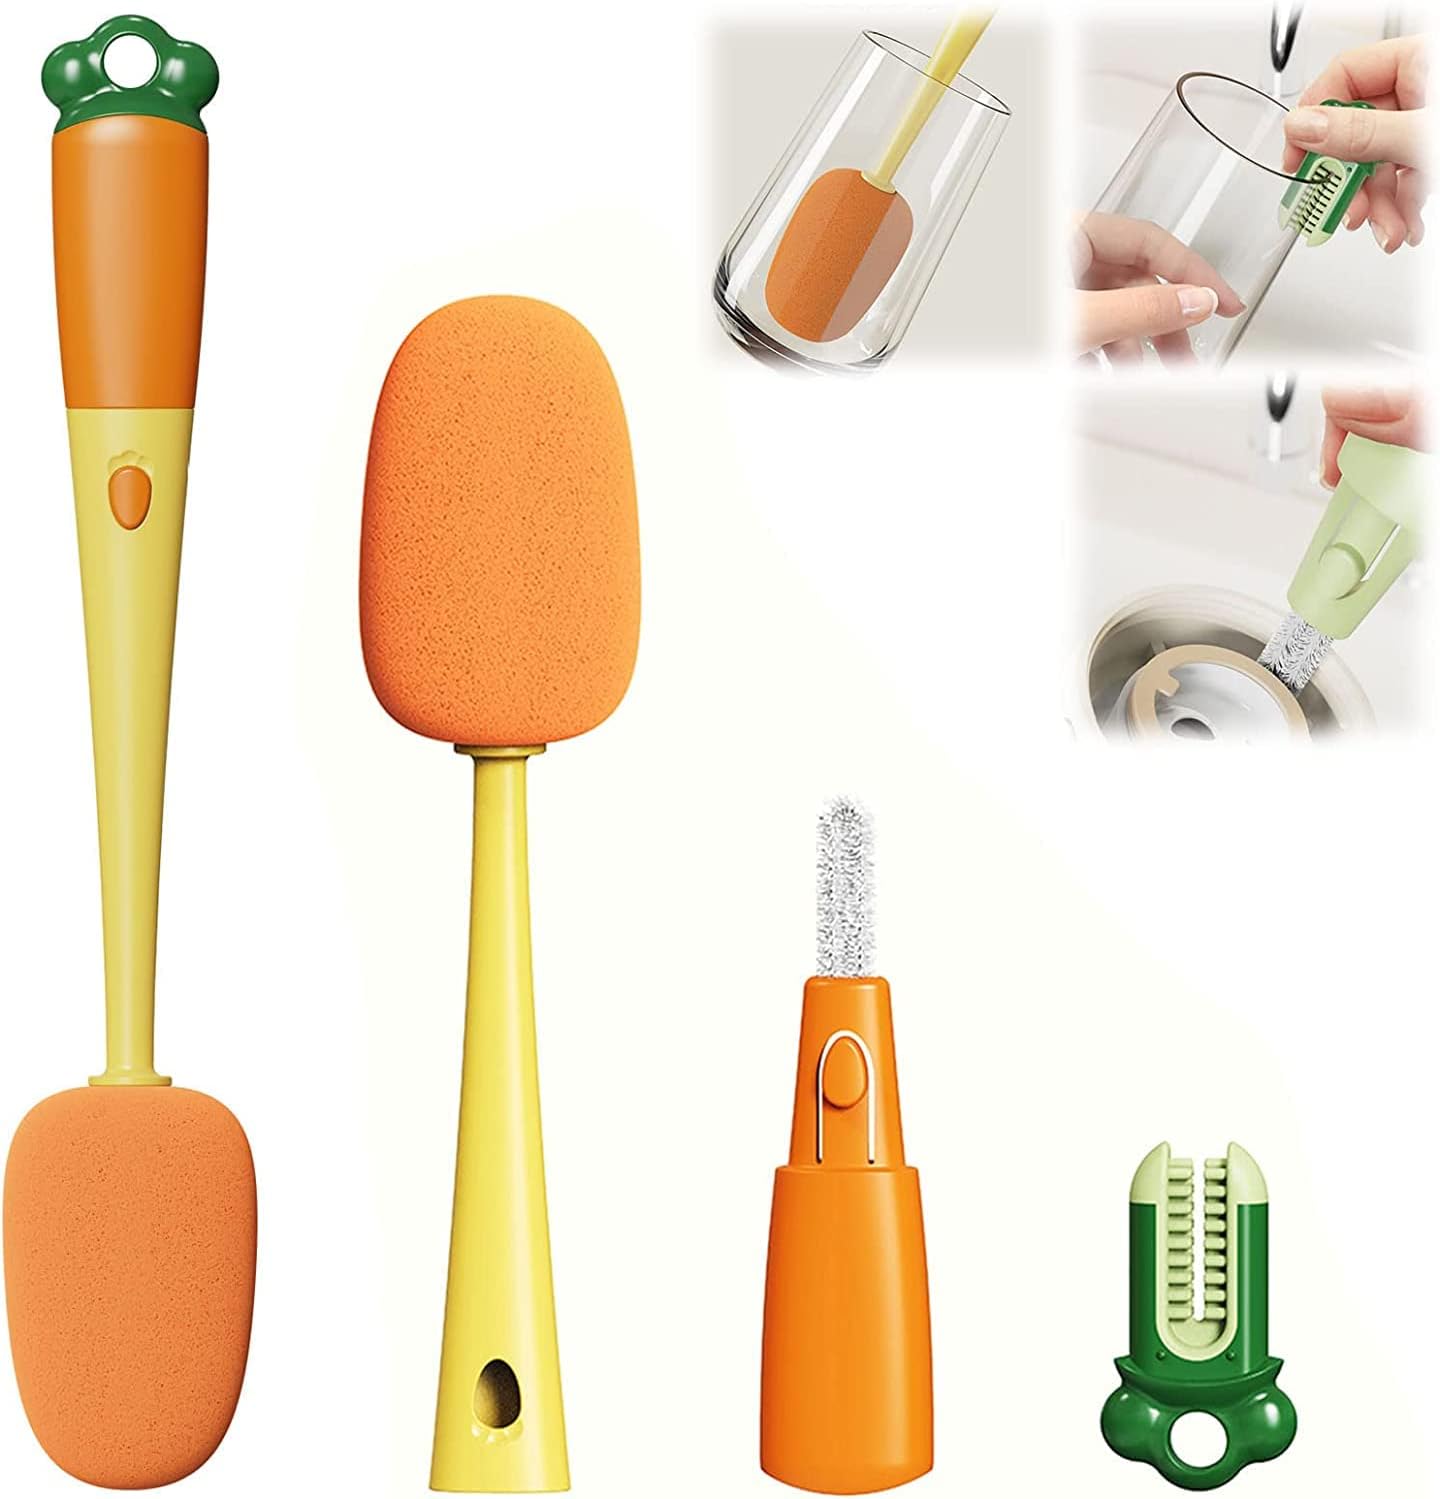 3 in 1 Multifunctional Cleaning Brush,Tiny Bottle Cup Lid Detail Brush,Silicone  Bottle Brush,Water Bottle Brush,Bottle Cleaner Brush,Crevice Cleaner Tools, Brushes for Nursing Bottle Cups Cover(3PCS) 